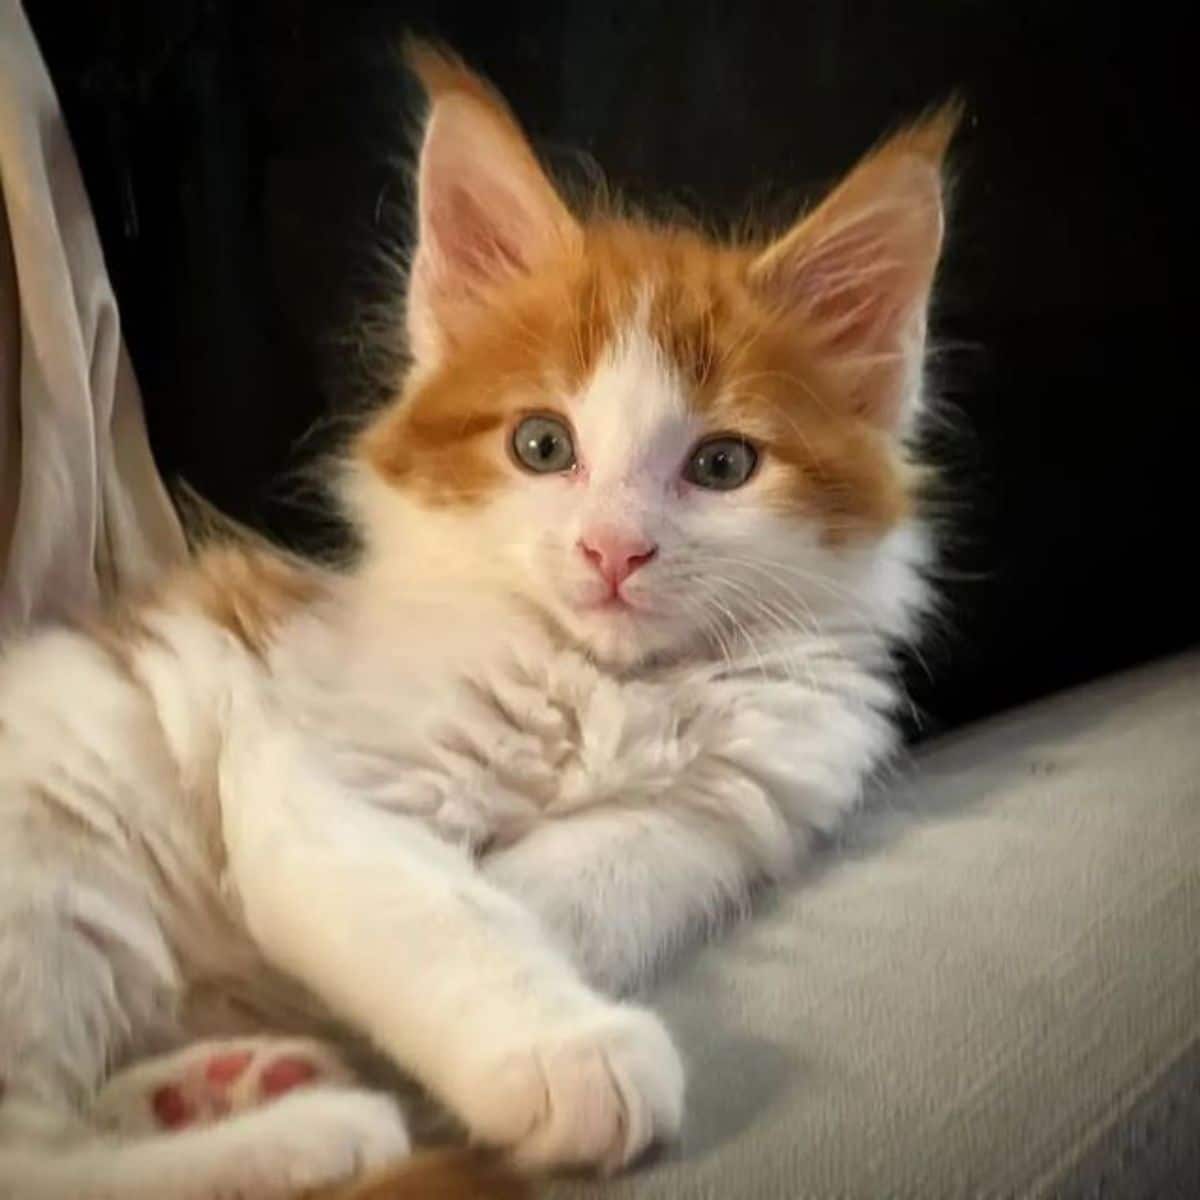 A cute fluffy maine coon kitten lying on a couch.